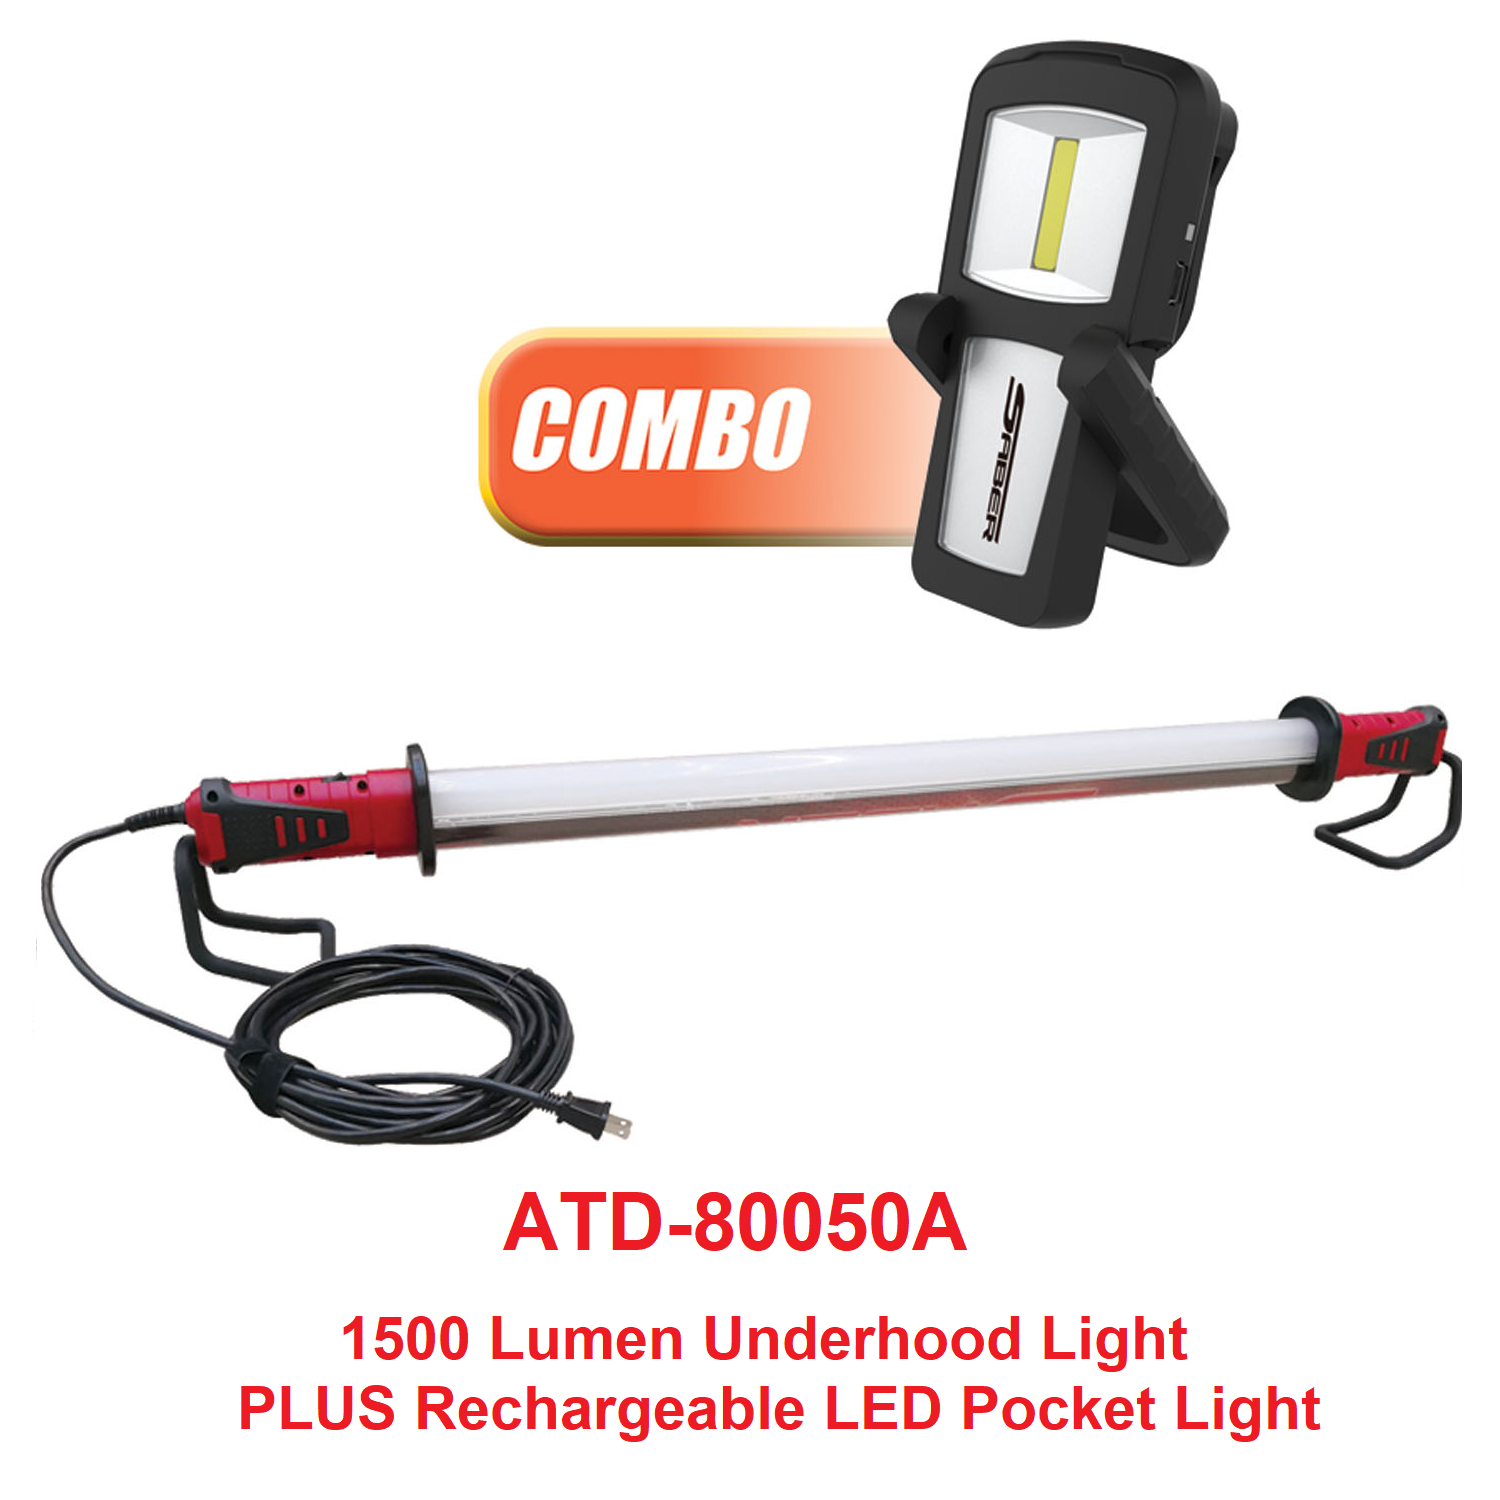 ATD Tools 80050A 1500L LED Underhood Light WITH Rechargeable Pocket Light 